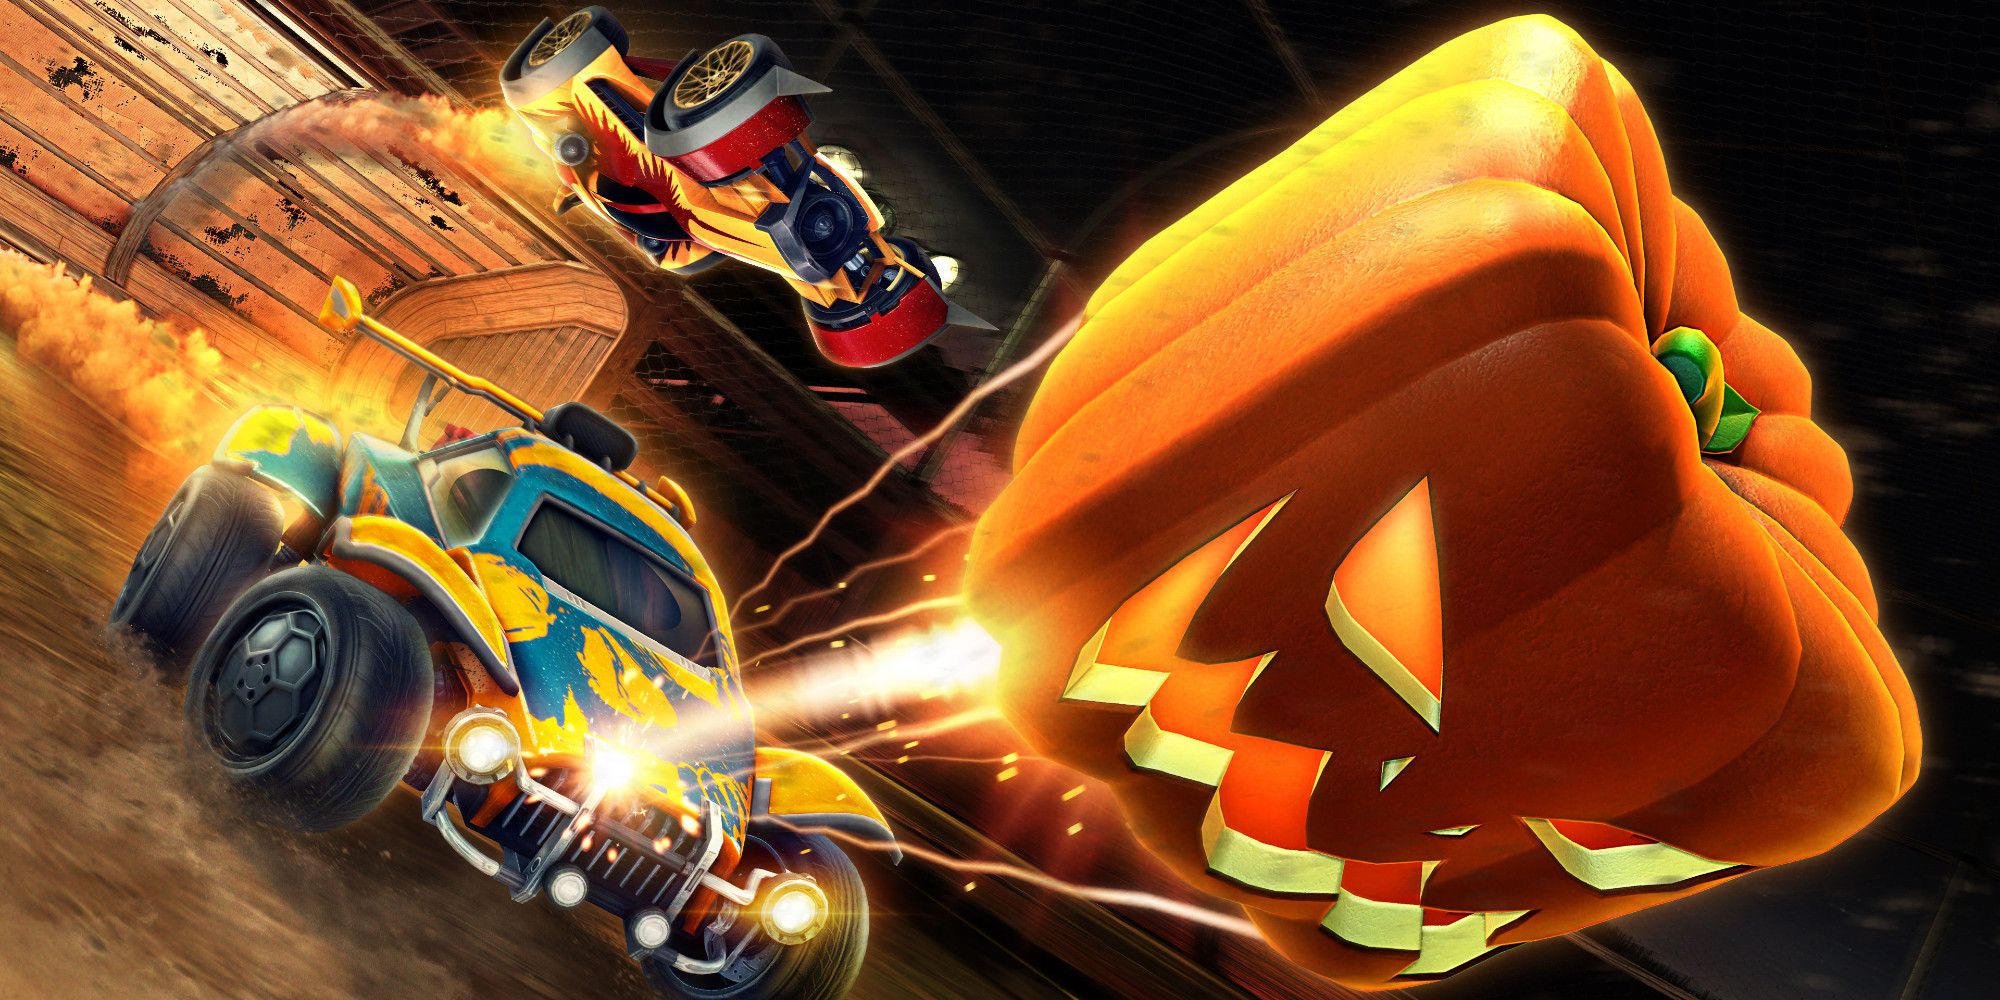 Image of a pumpkin from Rocket League's Haunted Hallows 2022 event